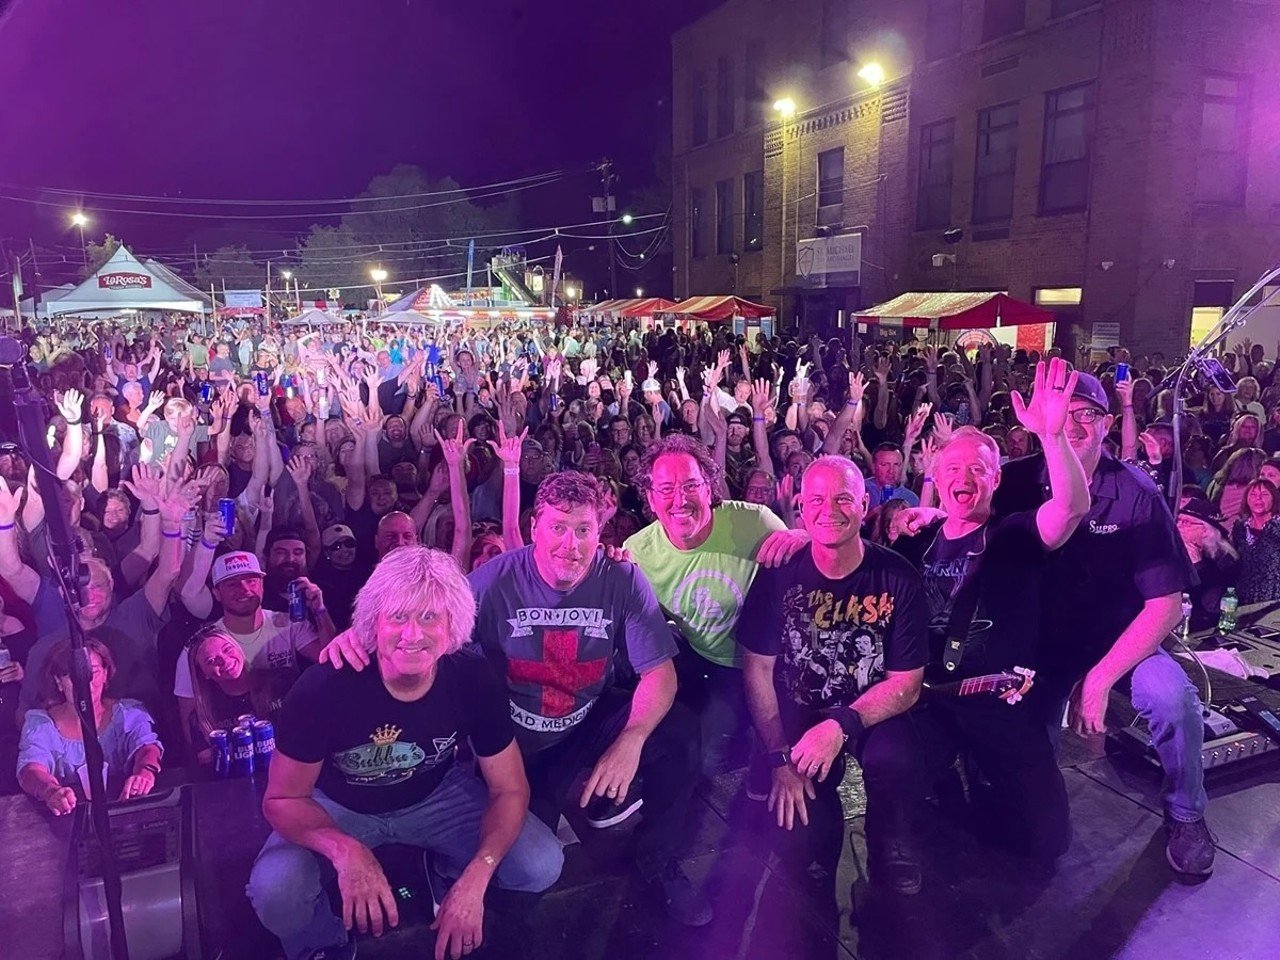 St. Mike Fest
When: June 7-8 from 6-midnight and June 9 from 3-9 p.m. 
Where: Saint Michael Church, Blue Ash
What: Enjoy a weekend of live music, gambling, games, rides, food and drink.
Who: Saint Michael Church
Why: A weekend of family fun with live music by The Rusty Griswolds, DV8 and Matt Waters & The Recipe, along with games, rides and LaRosa’s pizza.